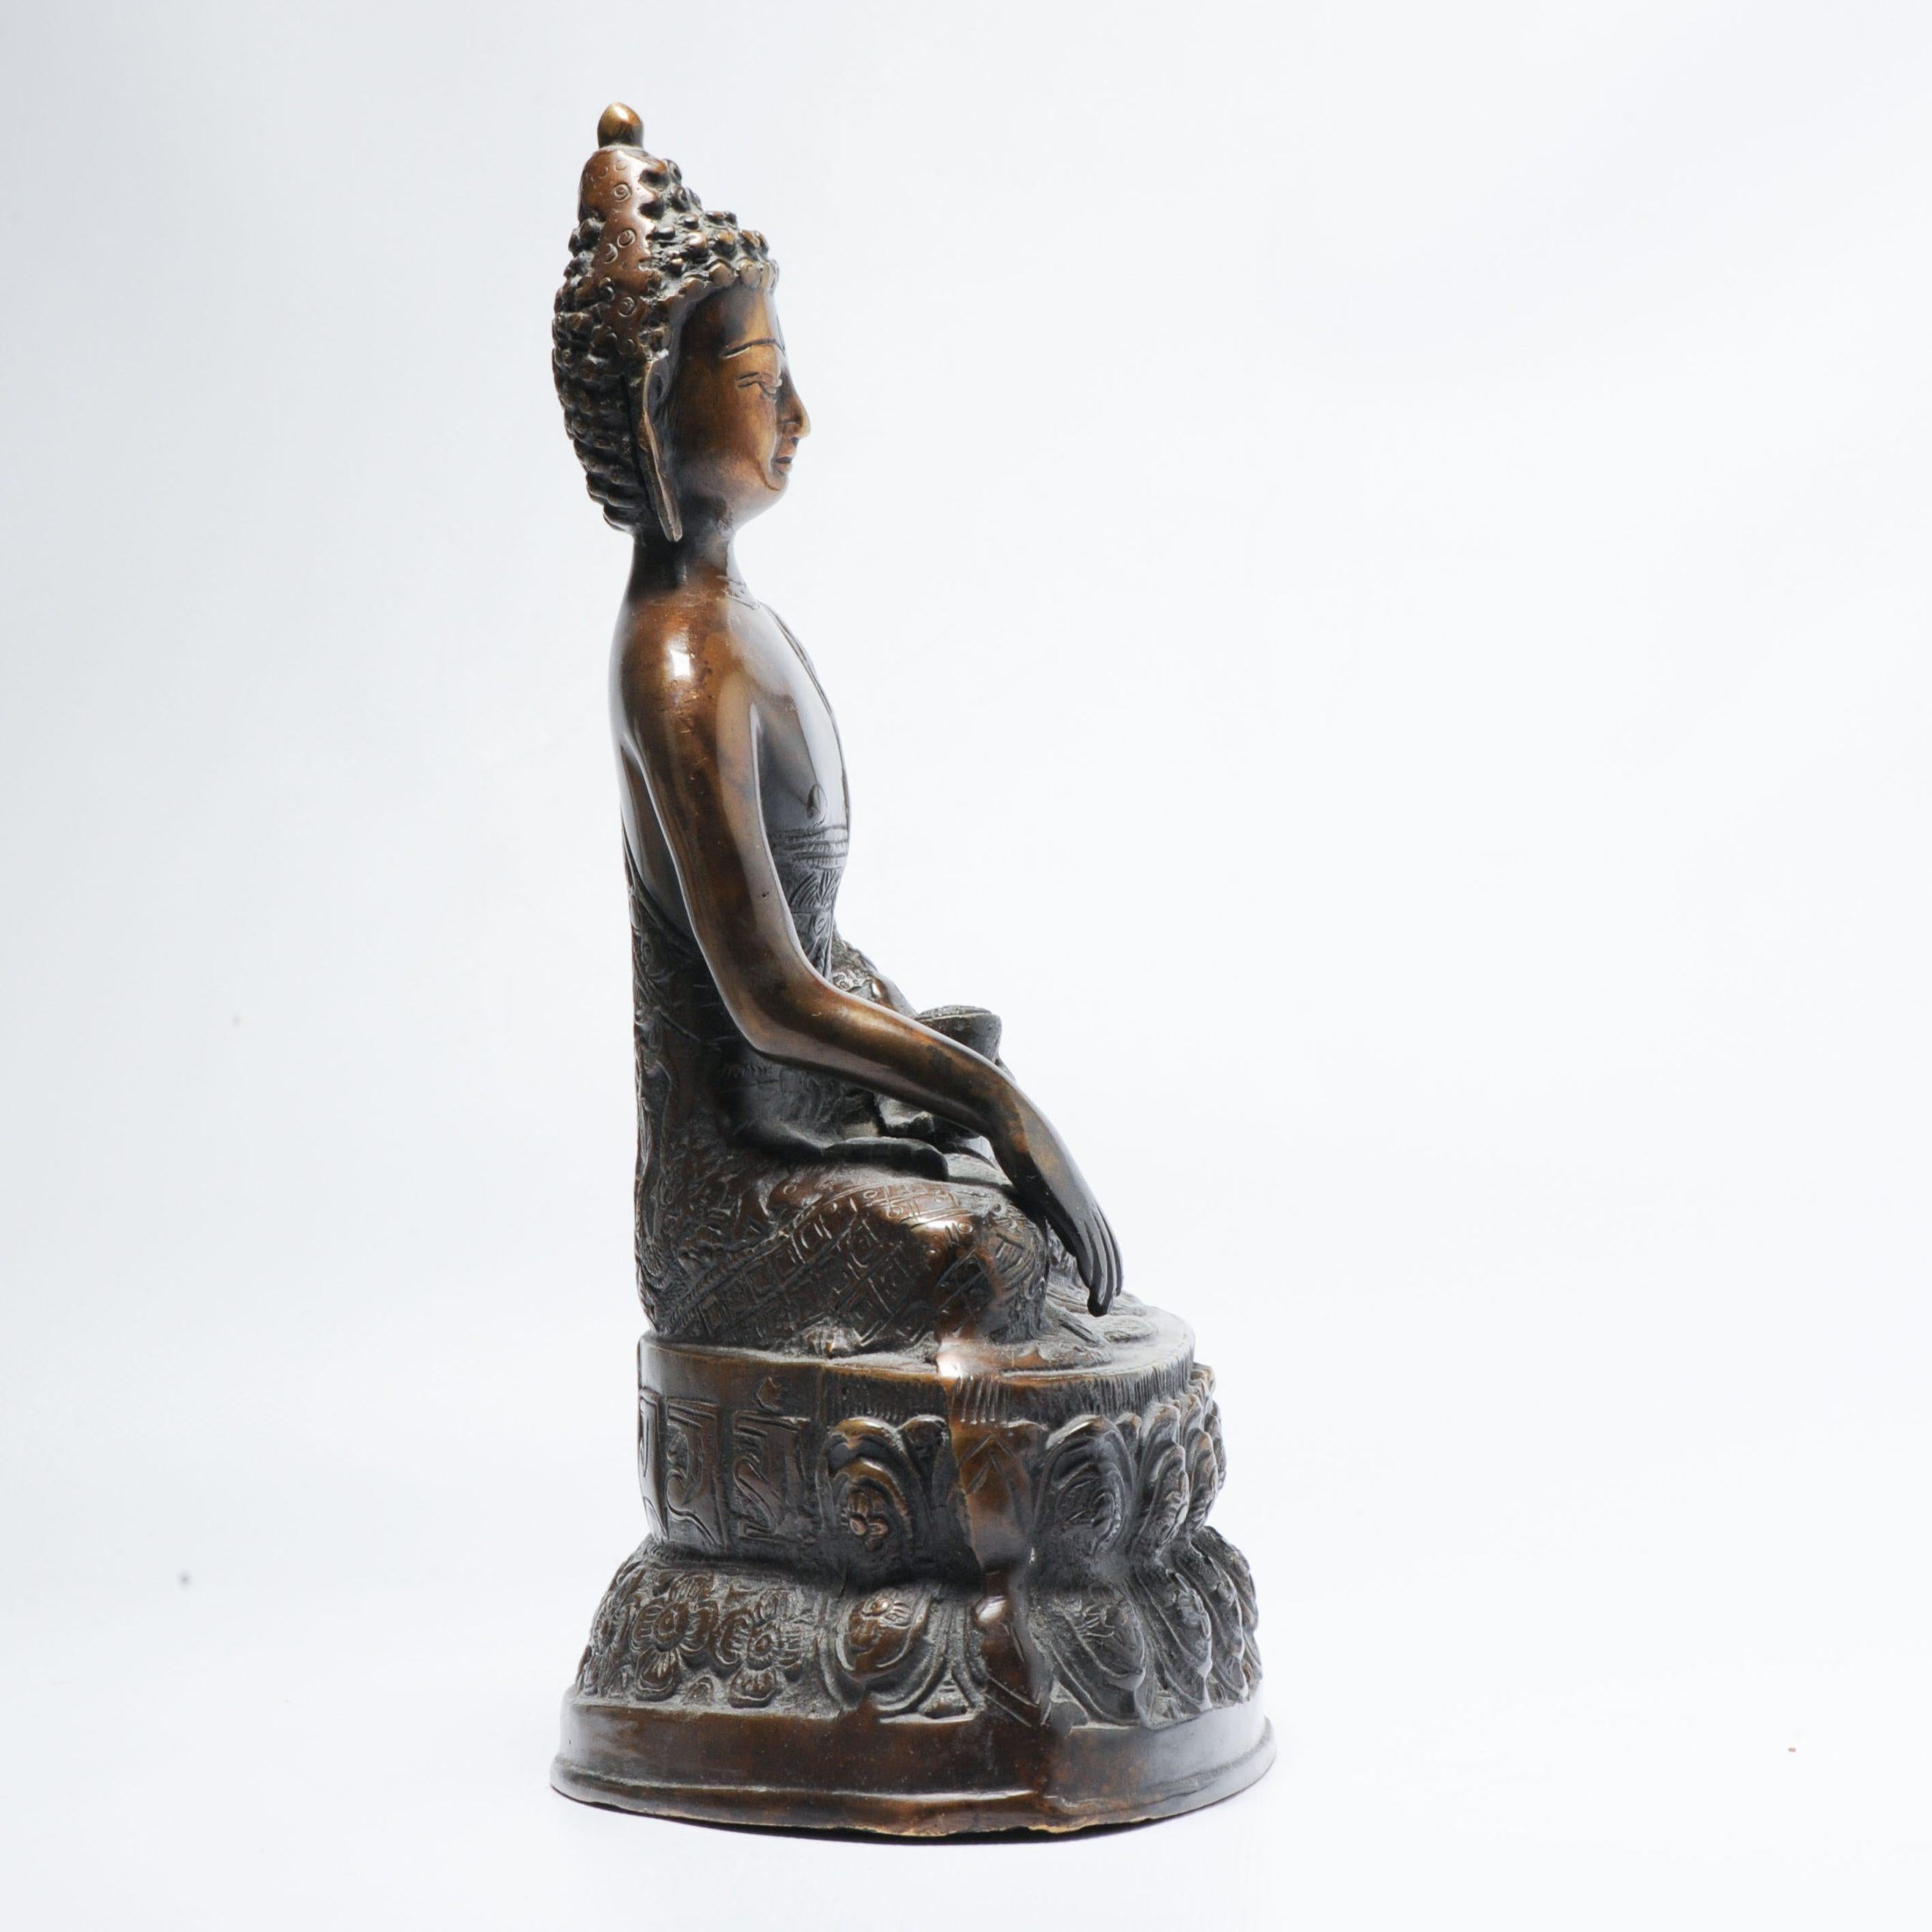 A 20th c Sino- Tibetan - Nepali statue. Bronze or cast iron.

Additional information:
Material: Bronze, Cloisonne & Metal
Region of Origin: China
Period: 20th century
Condition: Perfect, just some ware.
Dimension: 18 W x 27 H cm